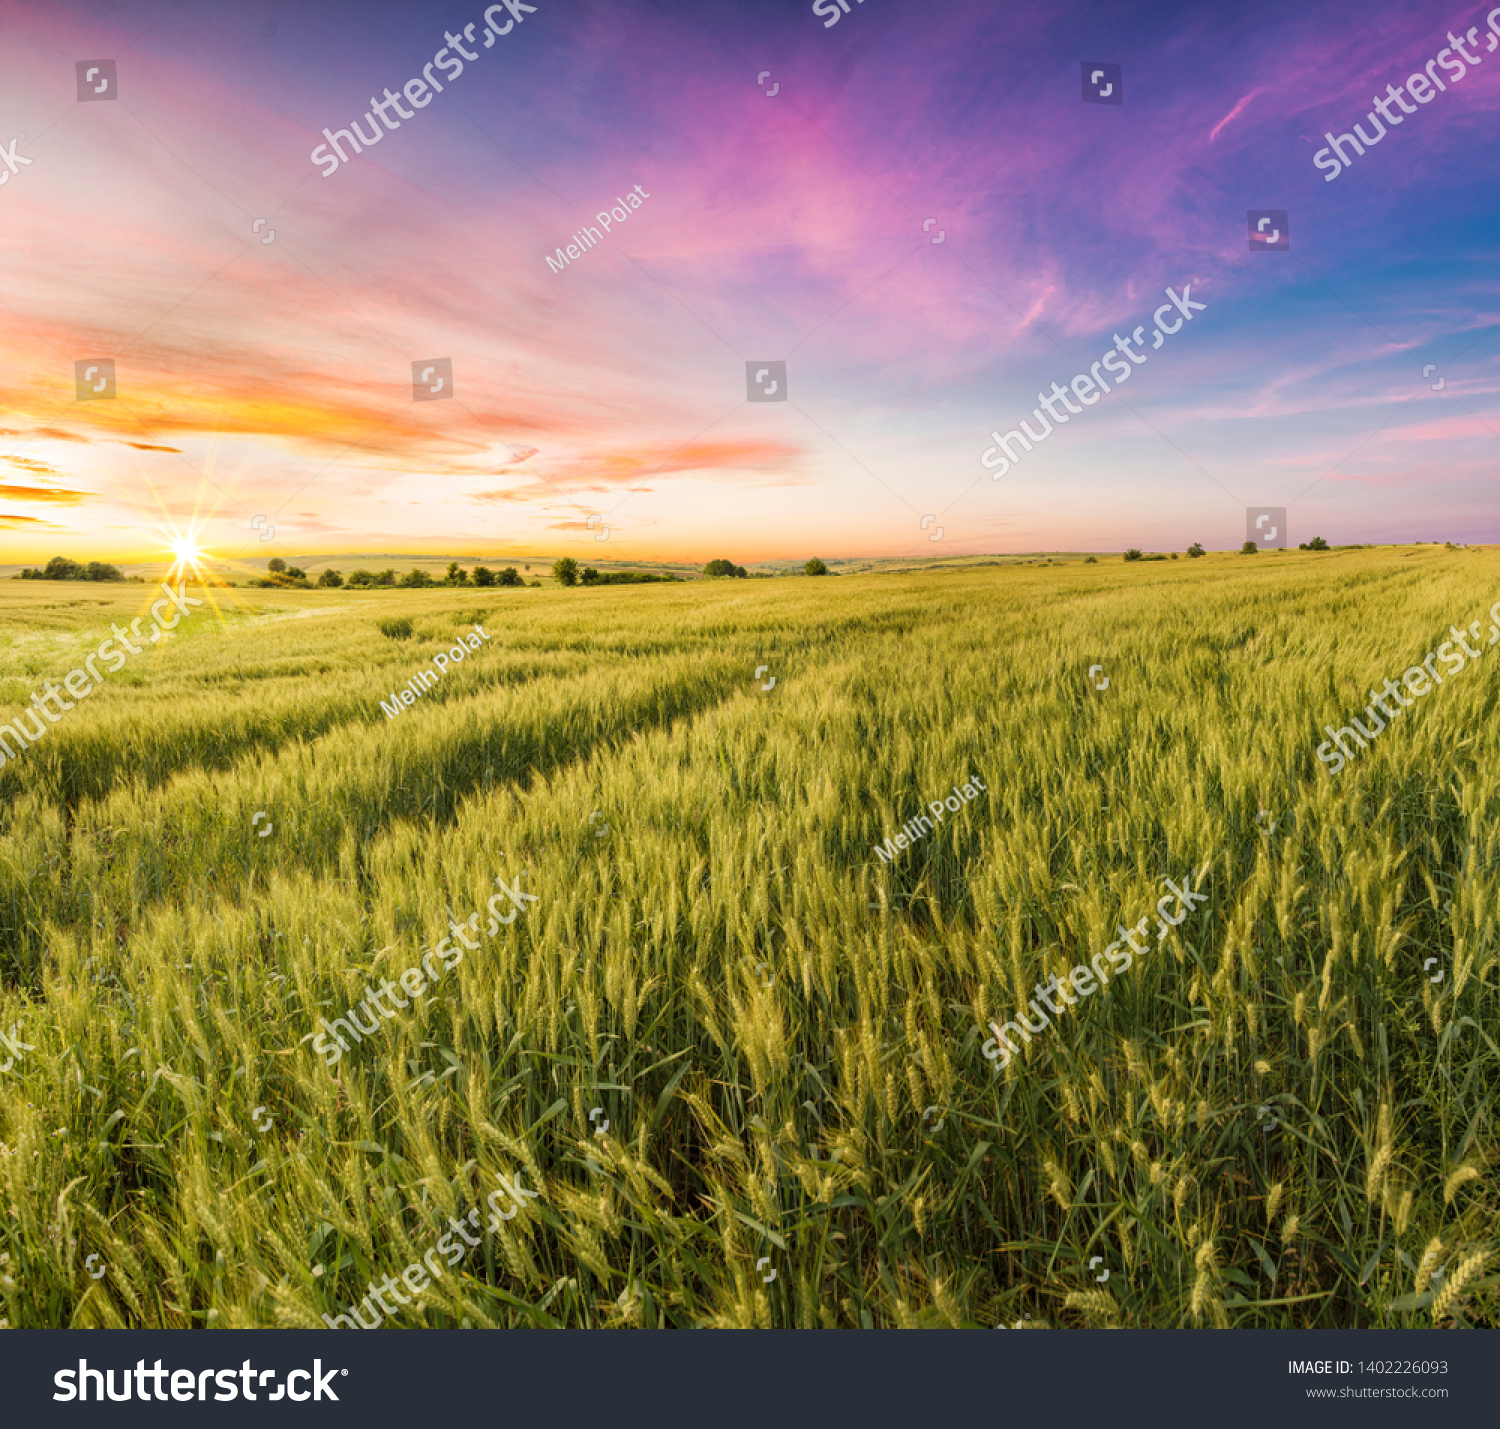 Lovely Panoramic Photo of a Wheat Field at Sunset Time #1402226093